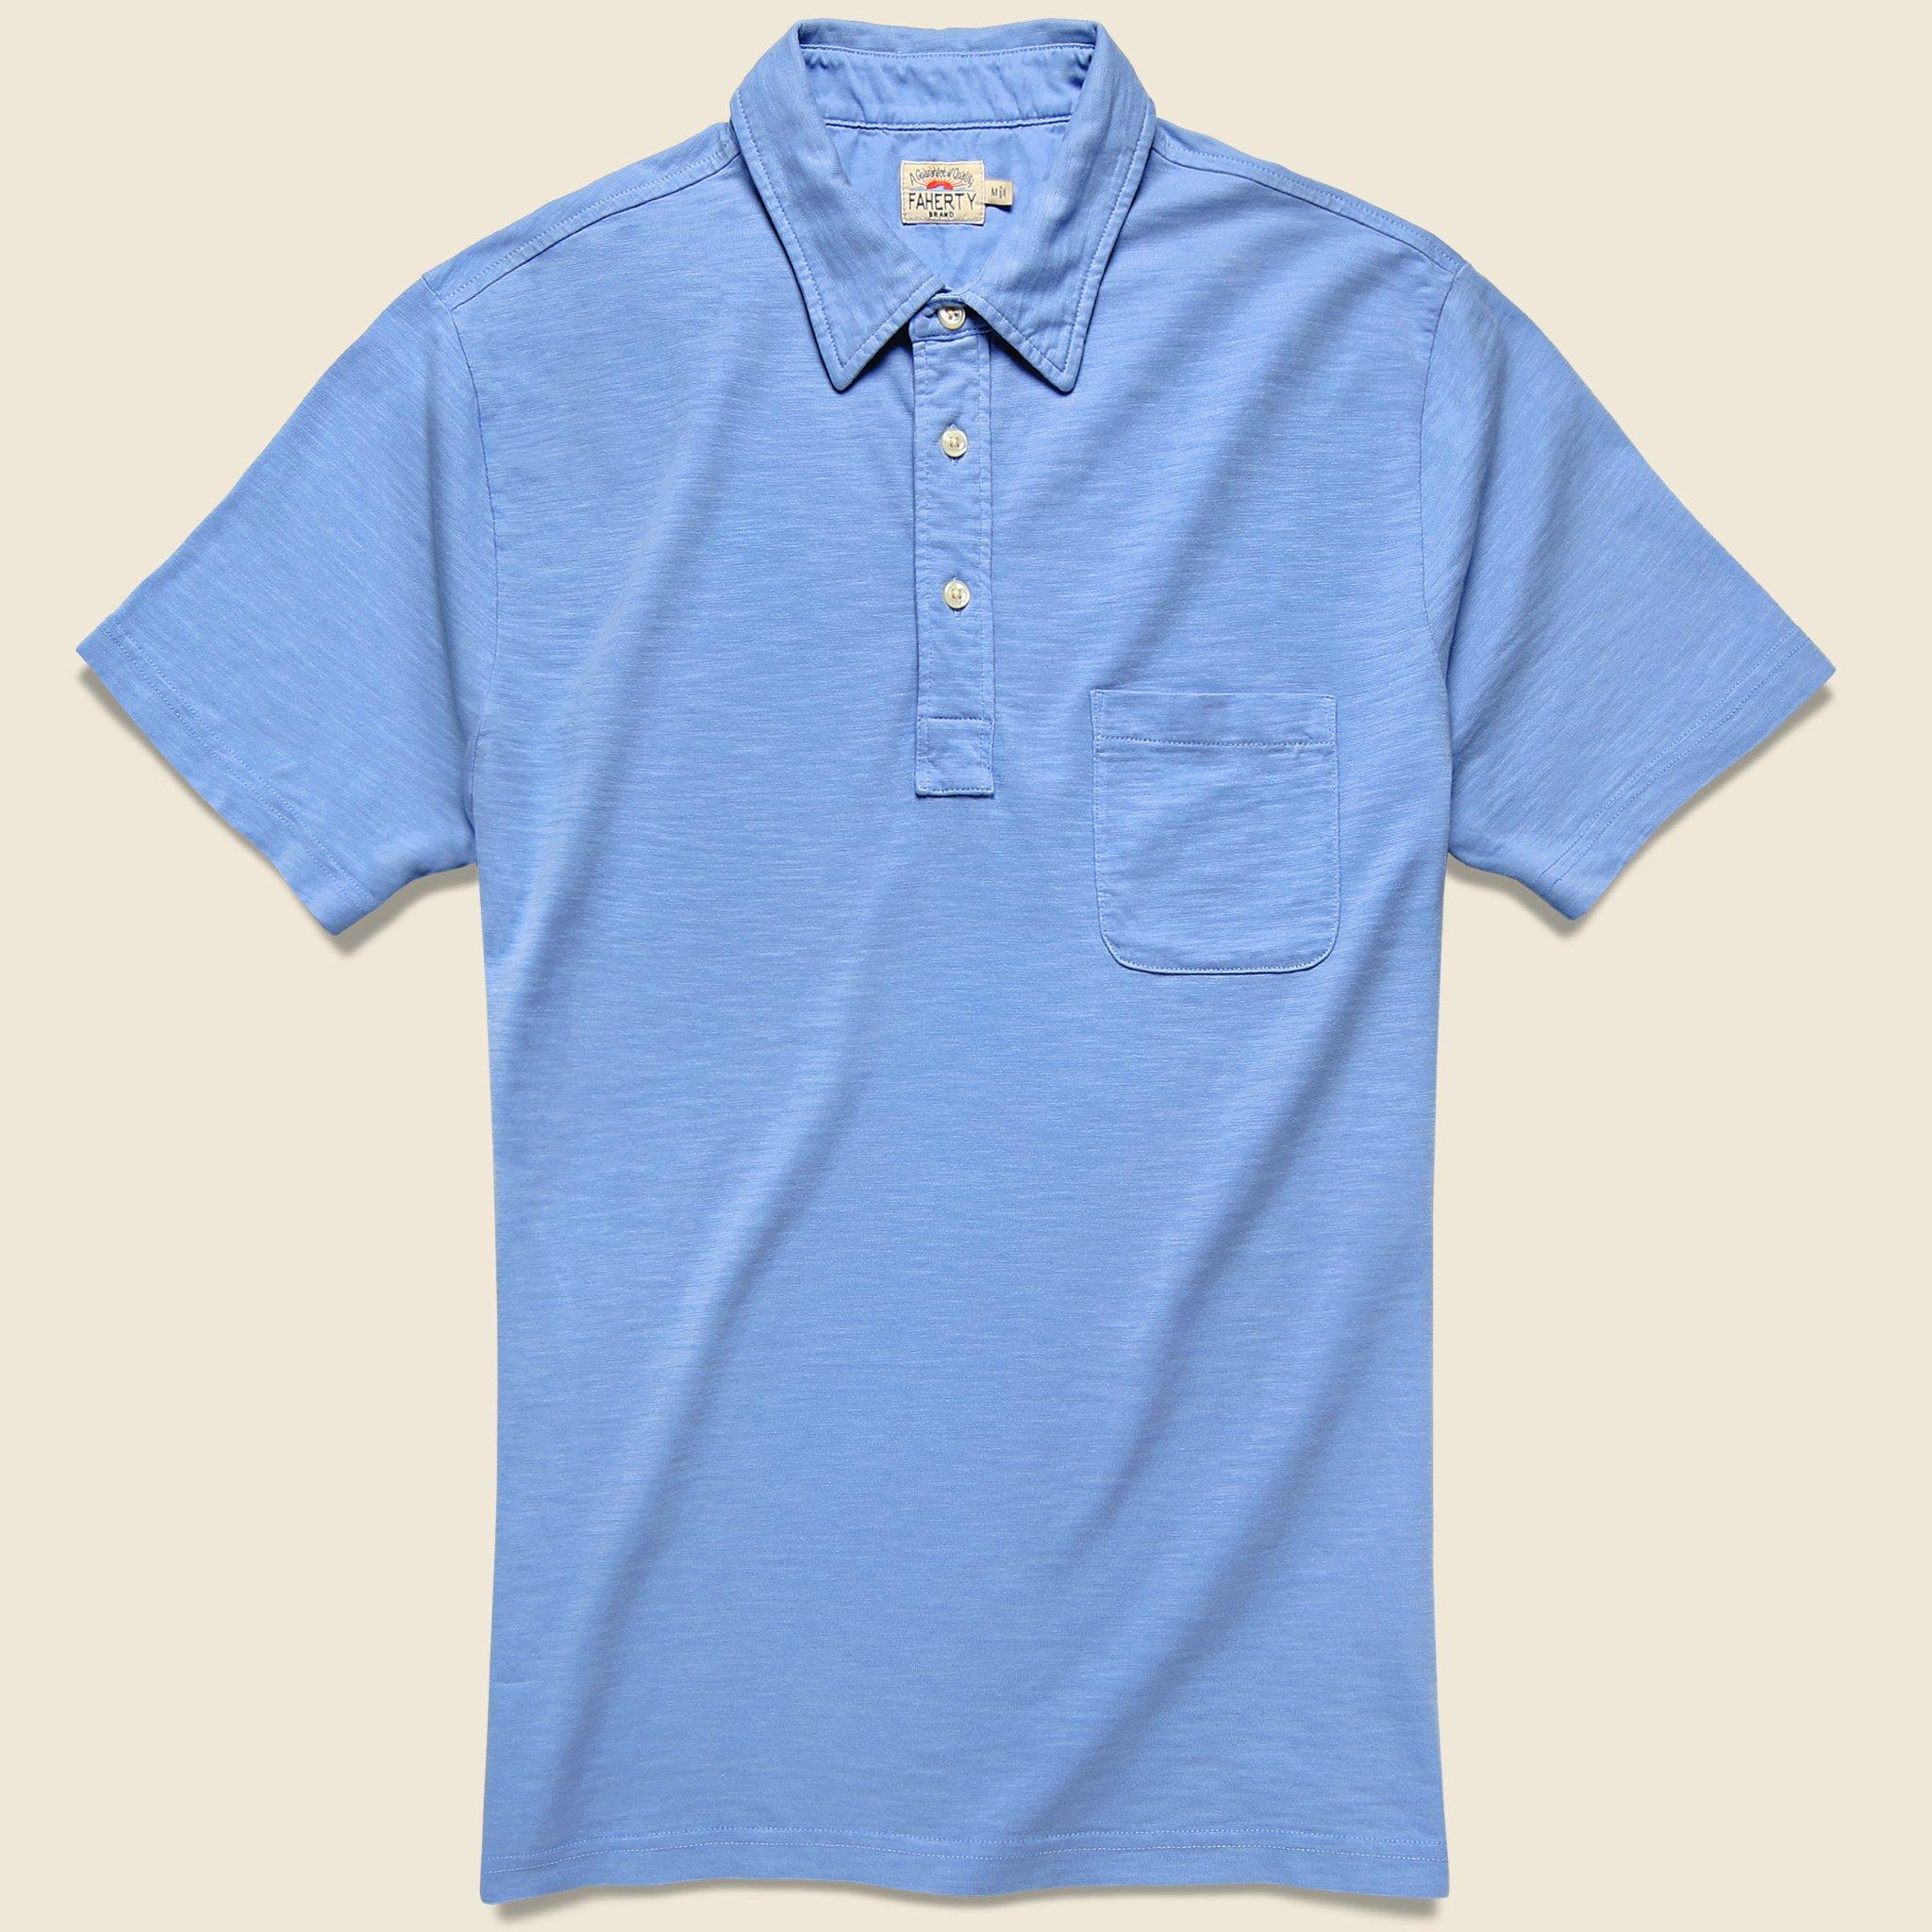 Faherty Brand Garment Dyed Polo - Azure in Blue for Men - Lyst